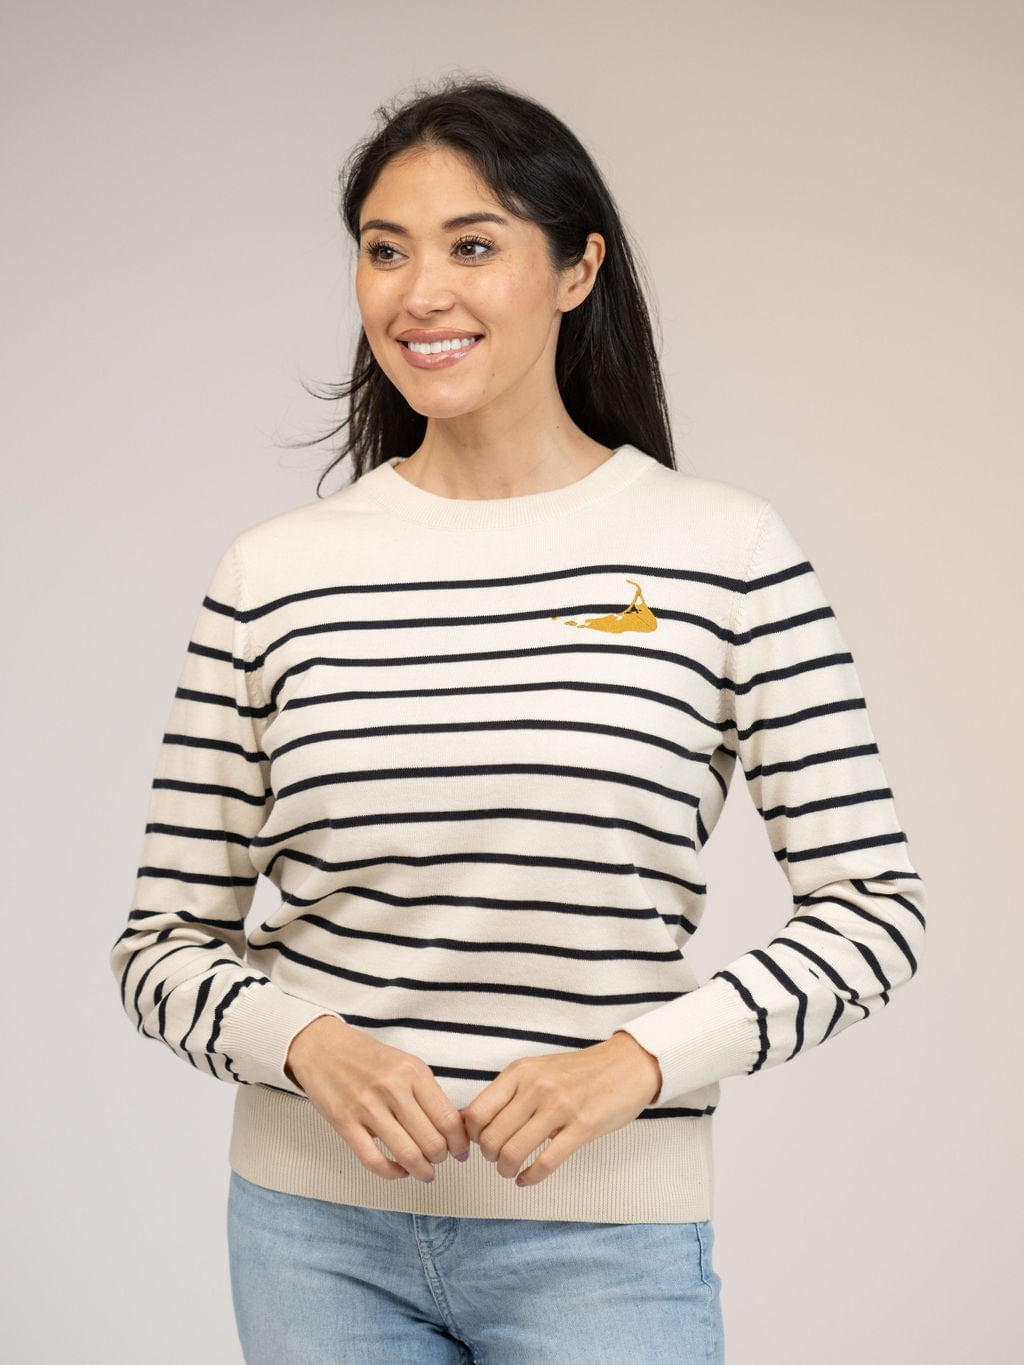 Beau & Ro Sweater Ivory Striped Sweater with Nantucket Island Embroidery